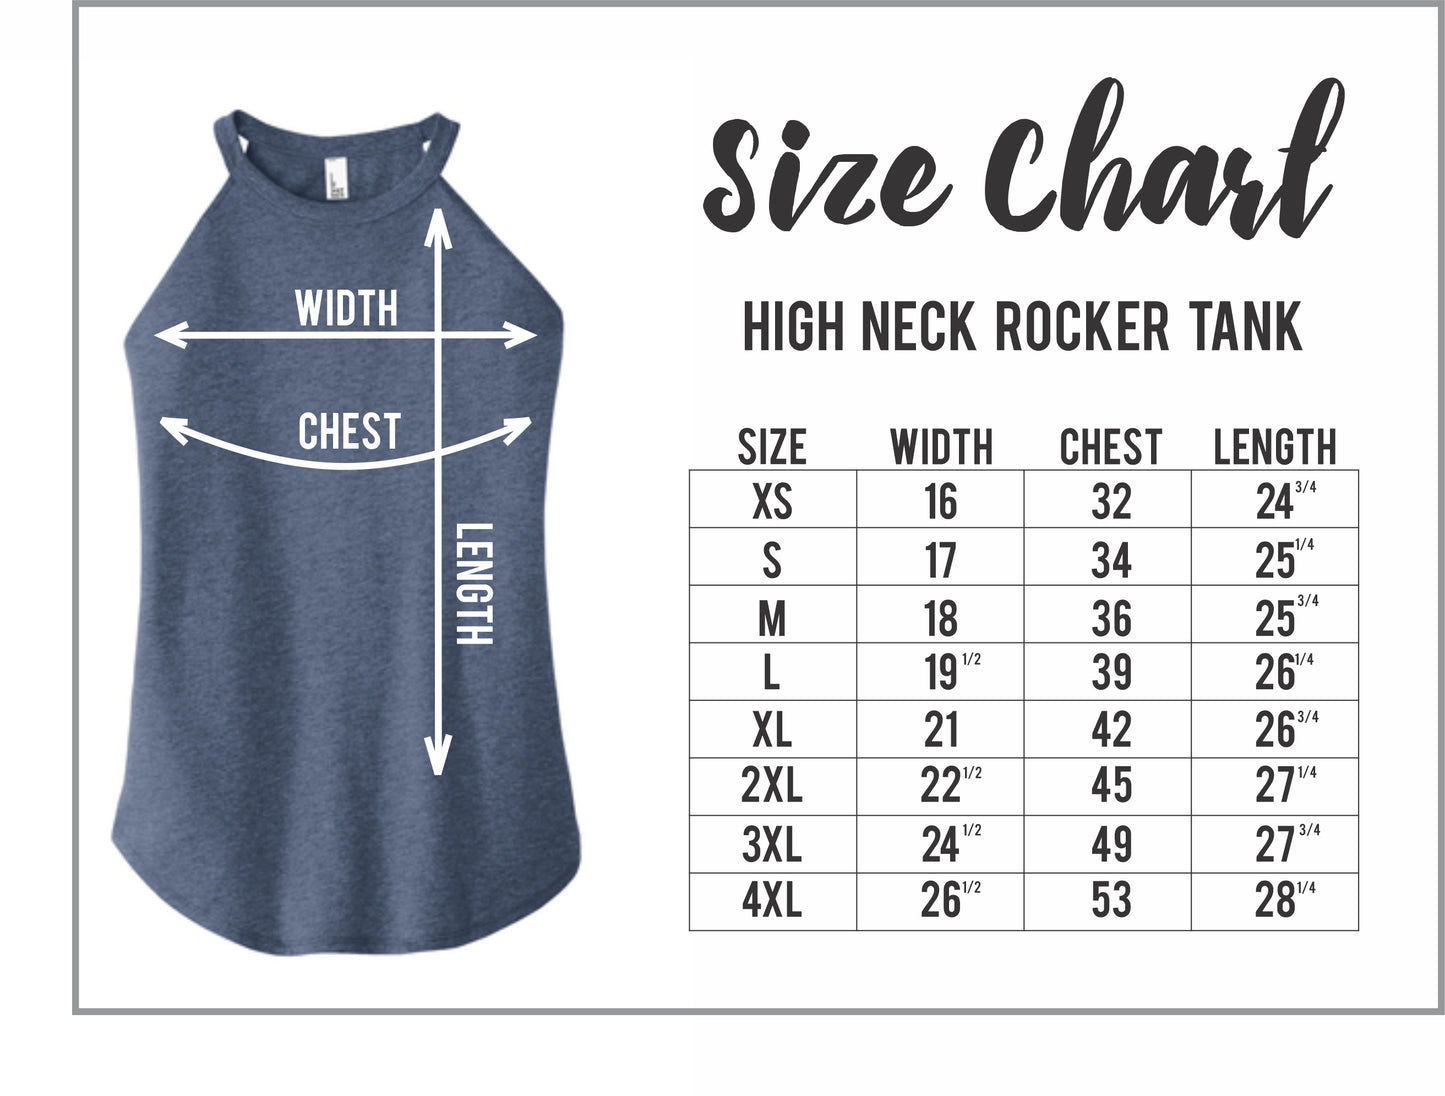 Happy to Demonstrate what Hits like a Girl really Means - High Neck Rocker Tank